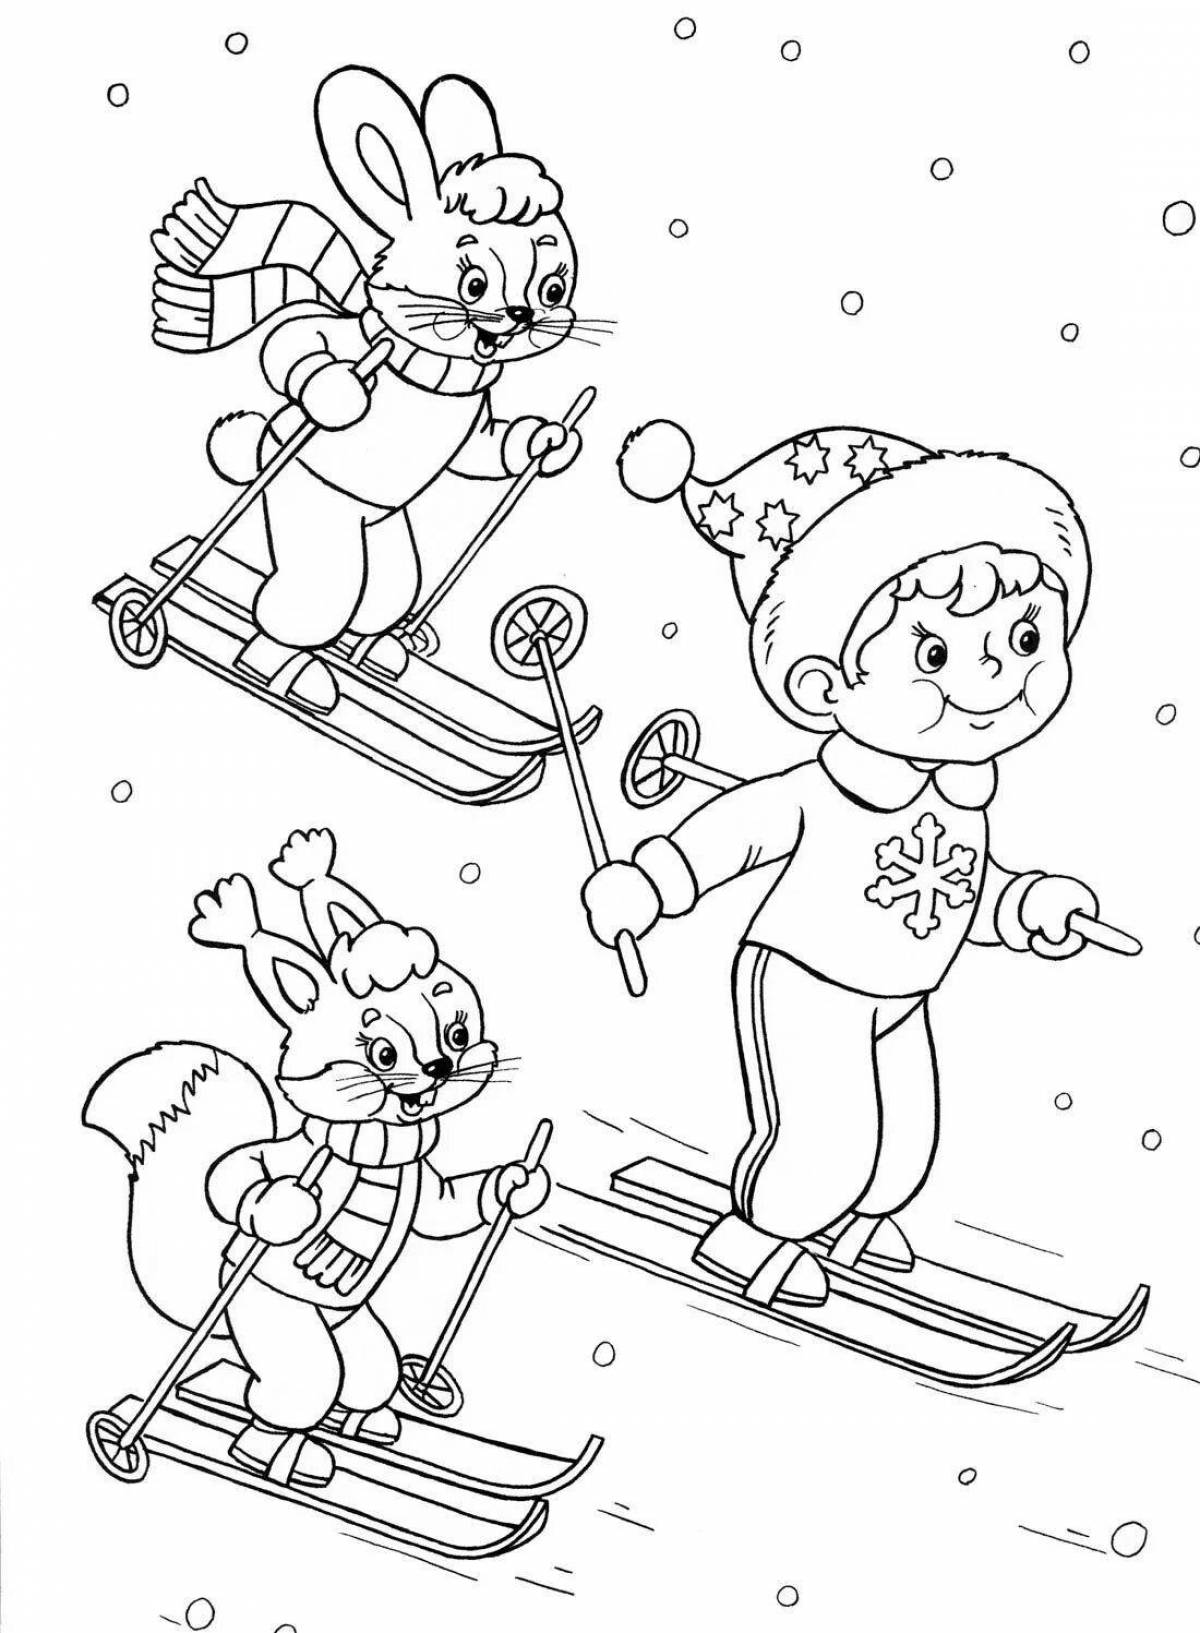 Colourful coloring book winter sports for children